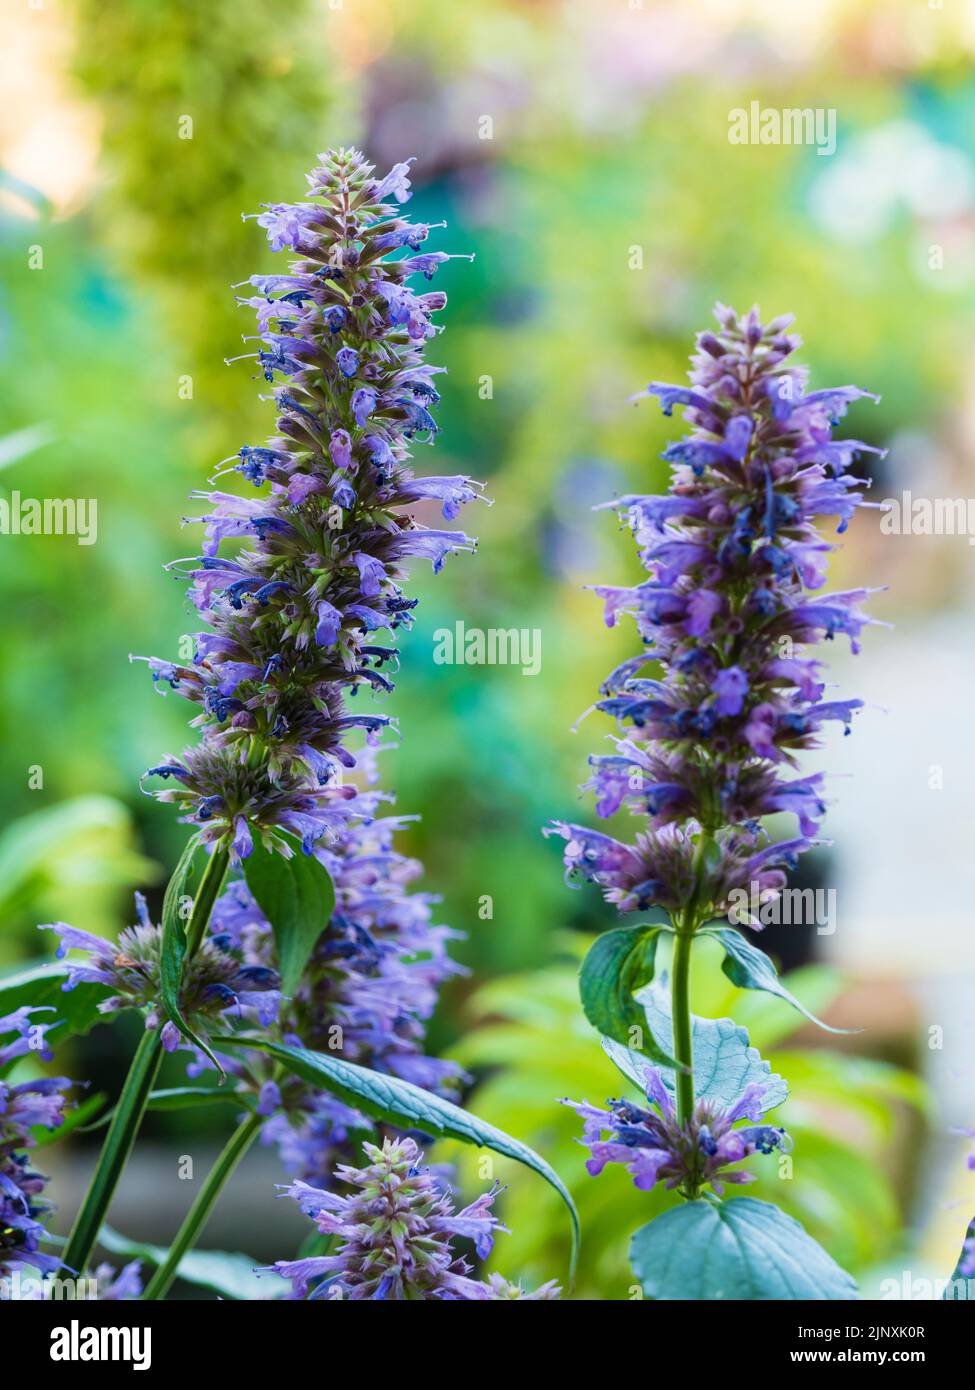 Upright spikes with long lasting masses of blue blooms of the half-hardy drought tolerant perennial anise hyssop, Agastache 'Blue Boa' Stock Photo